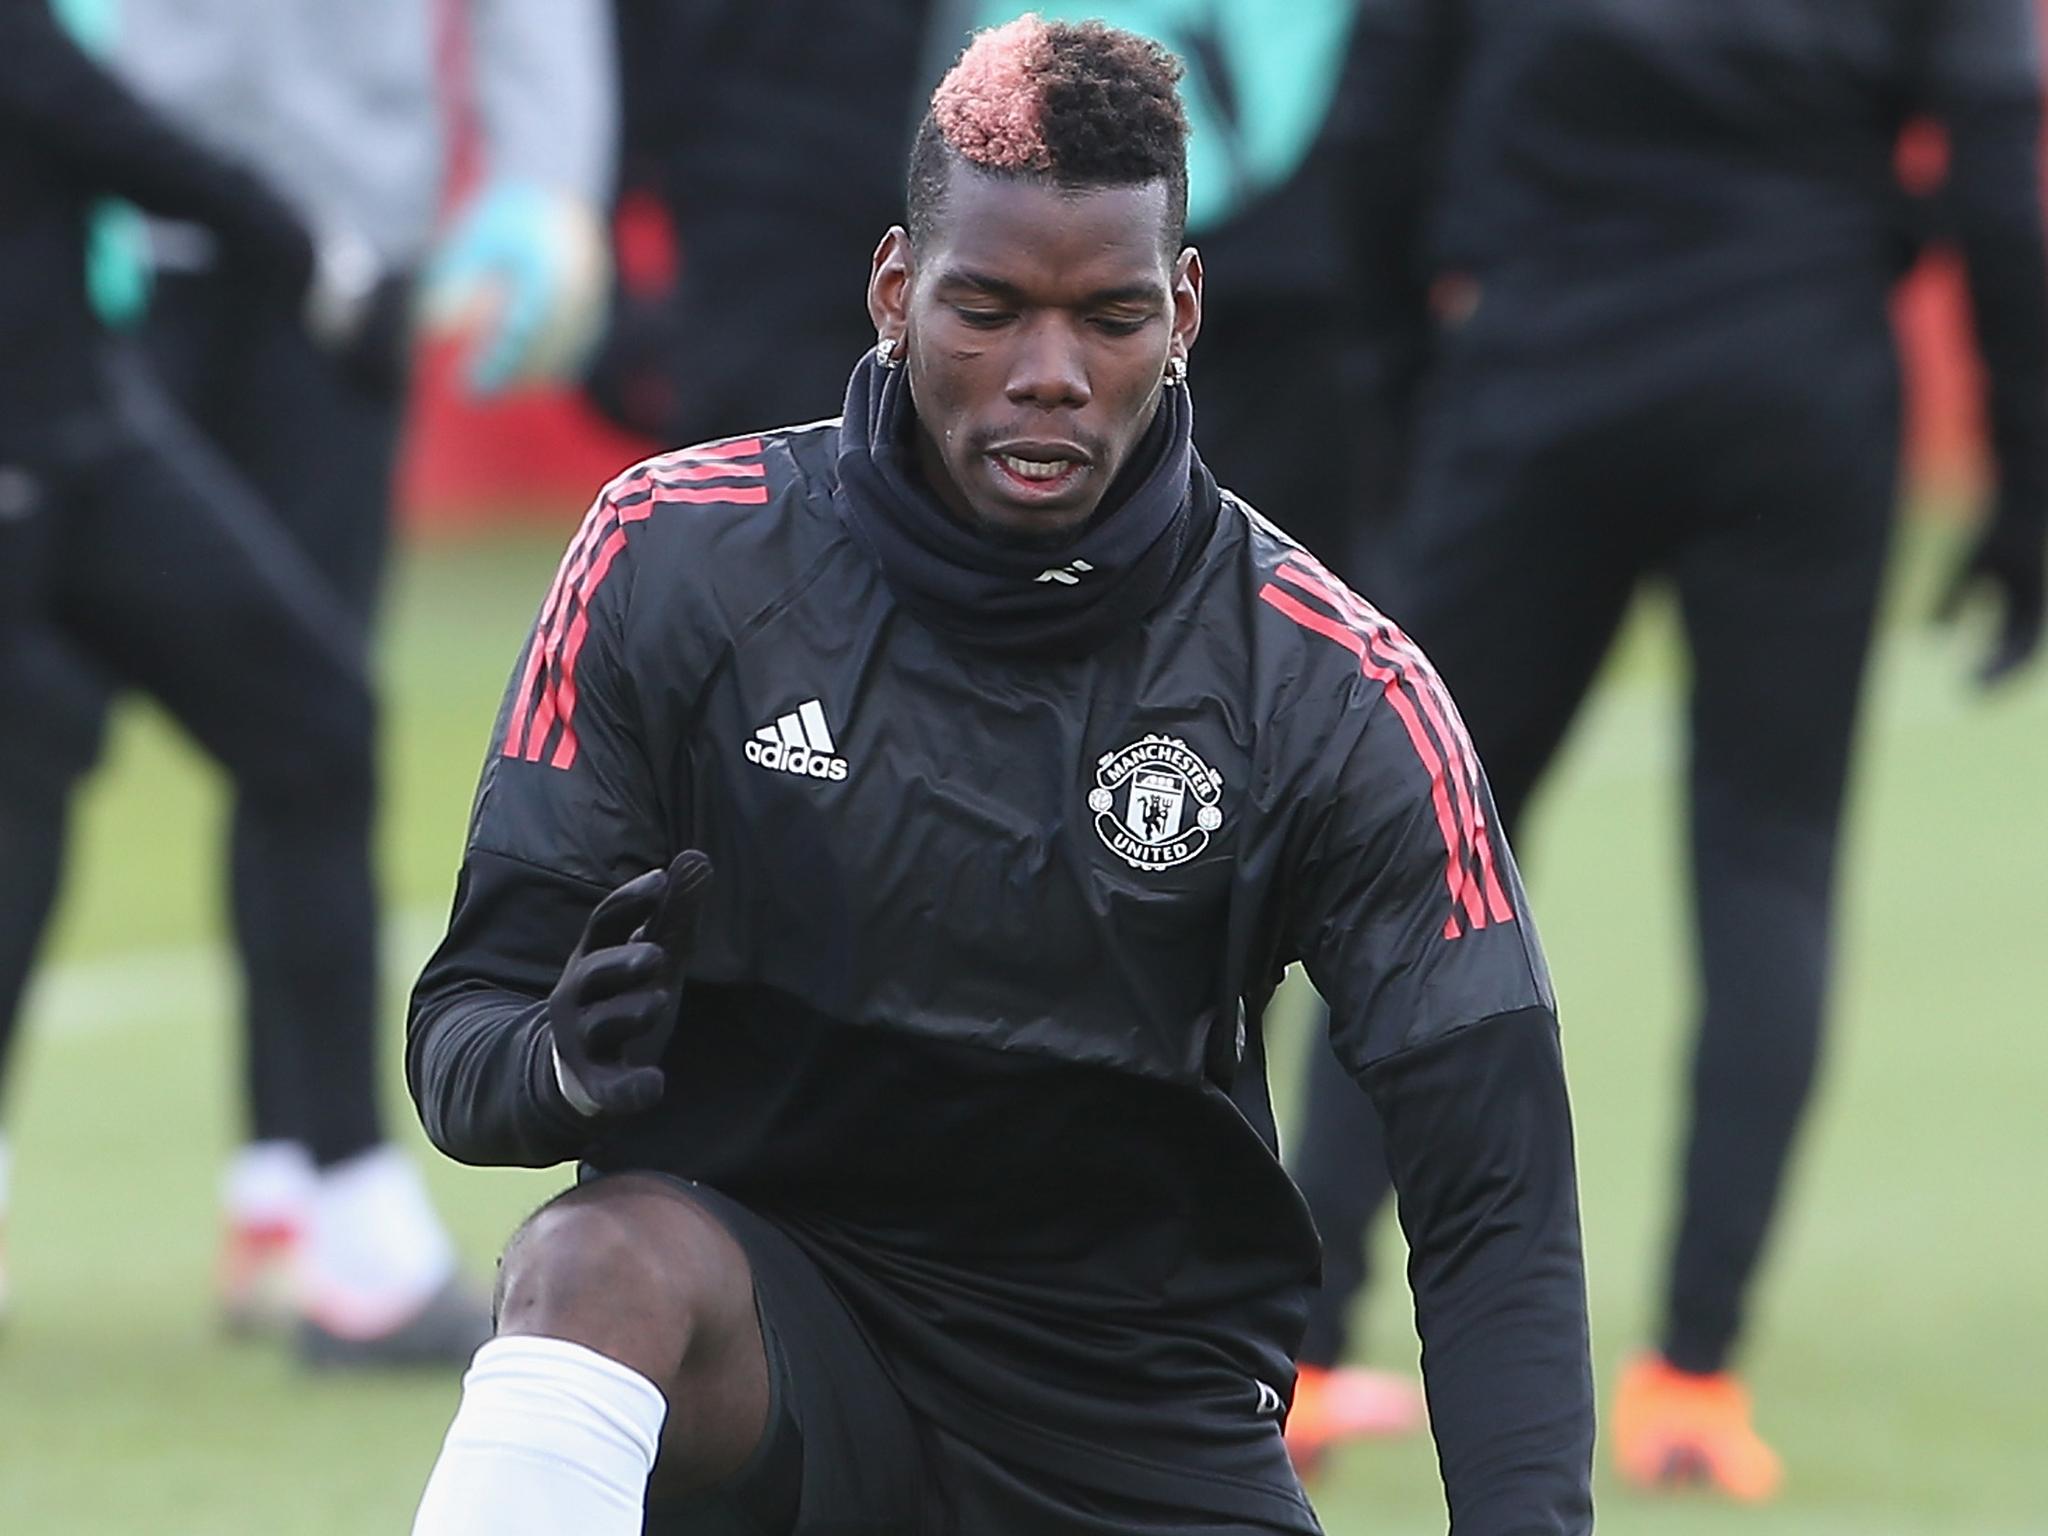 Paul Pogba has been criticised for not doing his defensive duties for Manchester United